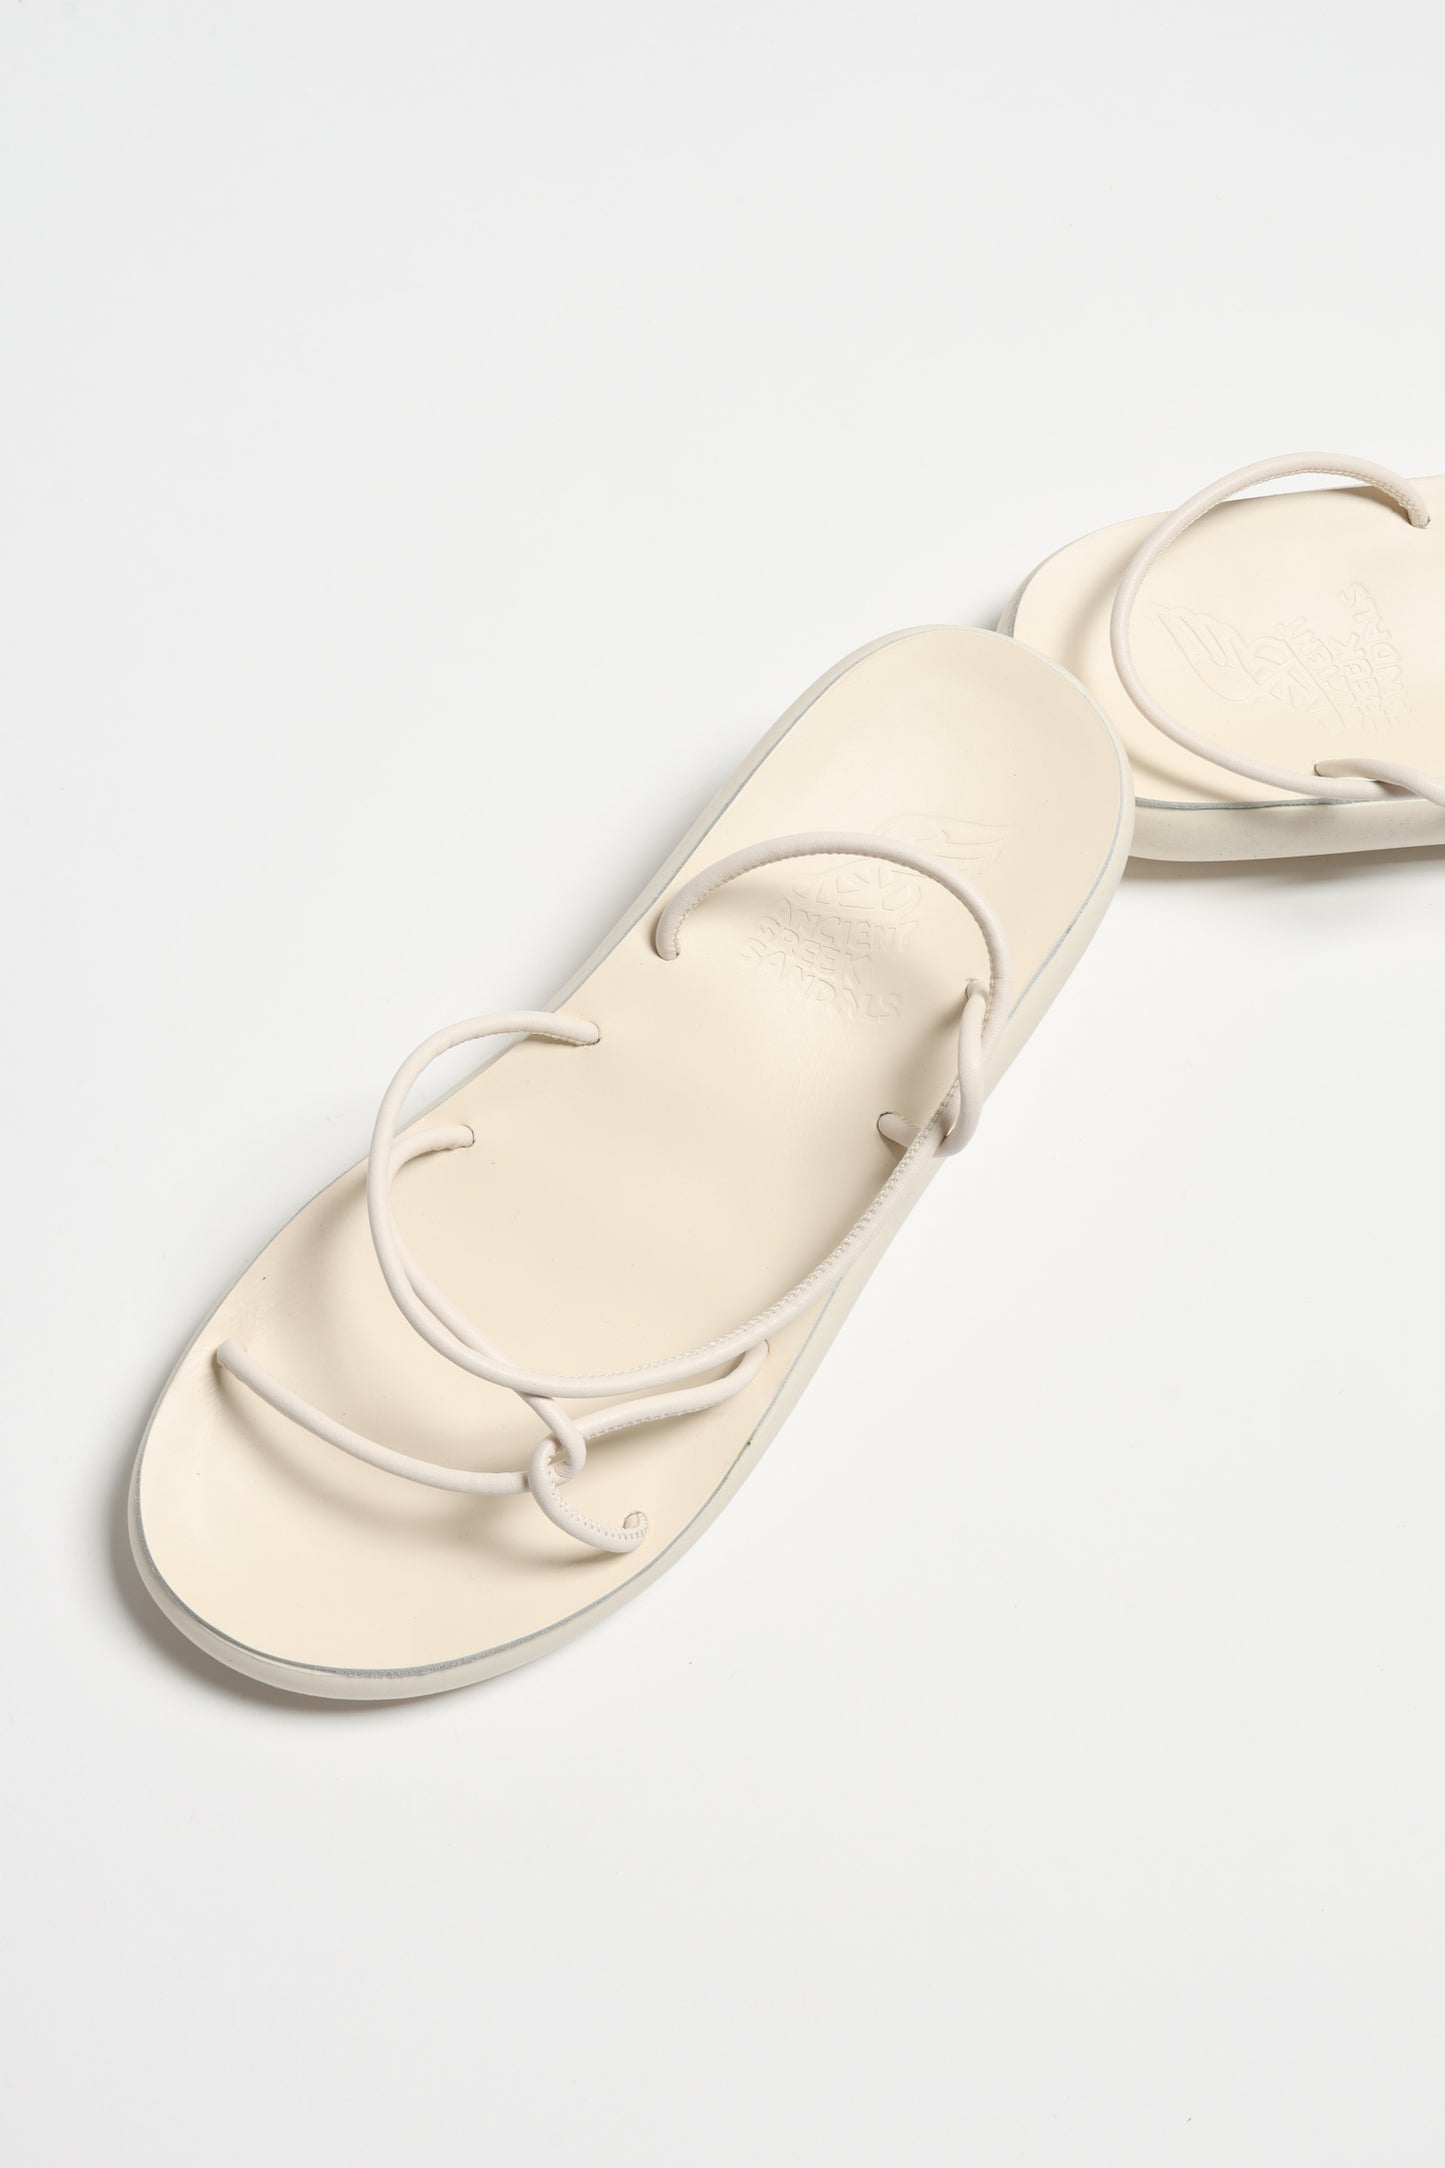 Sandale Taxidi Comfort in Off-WhiteAncient Greek Sandals - Anita Hass